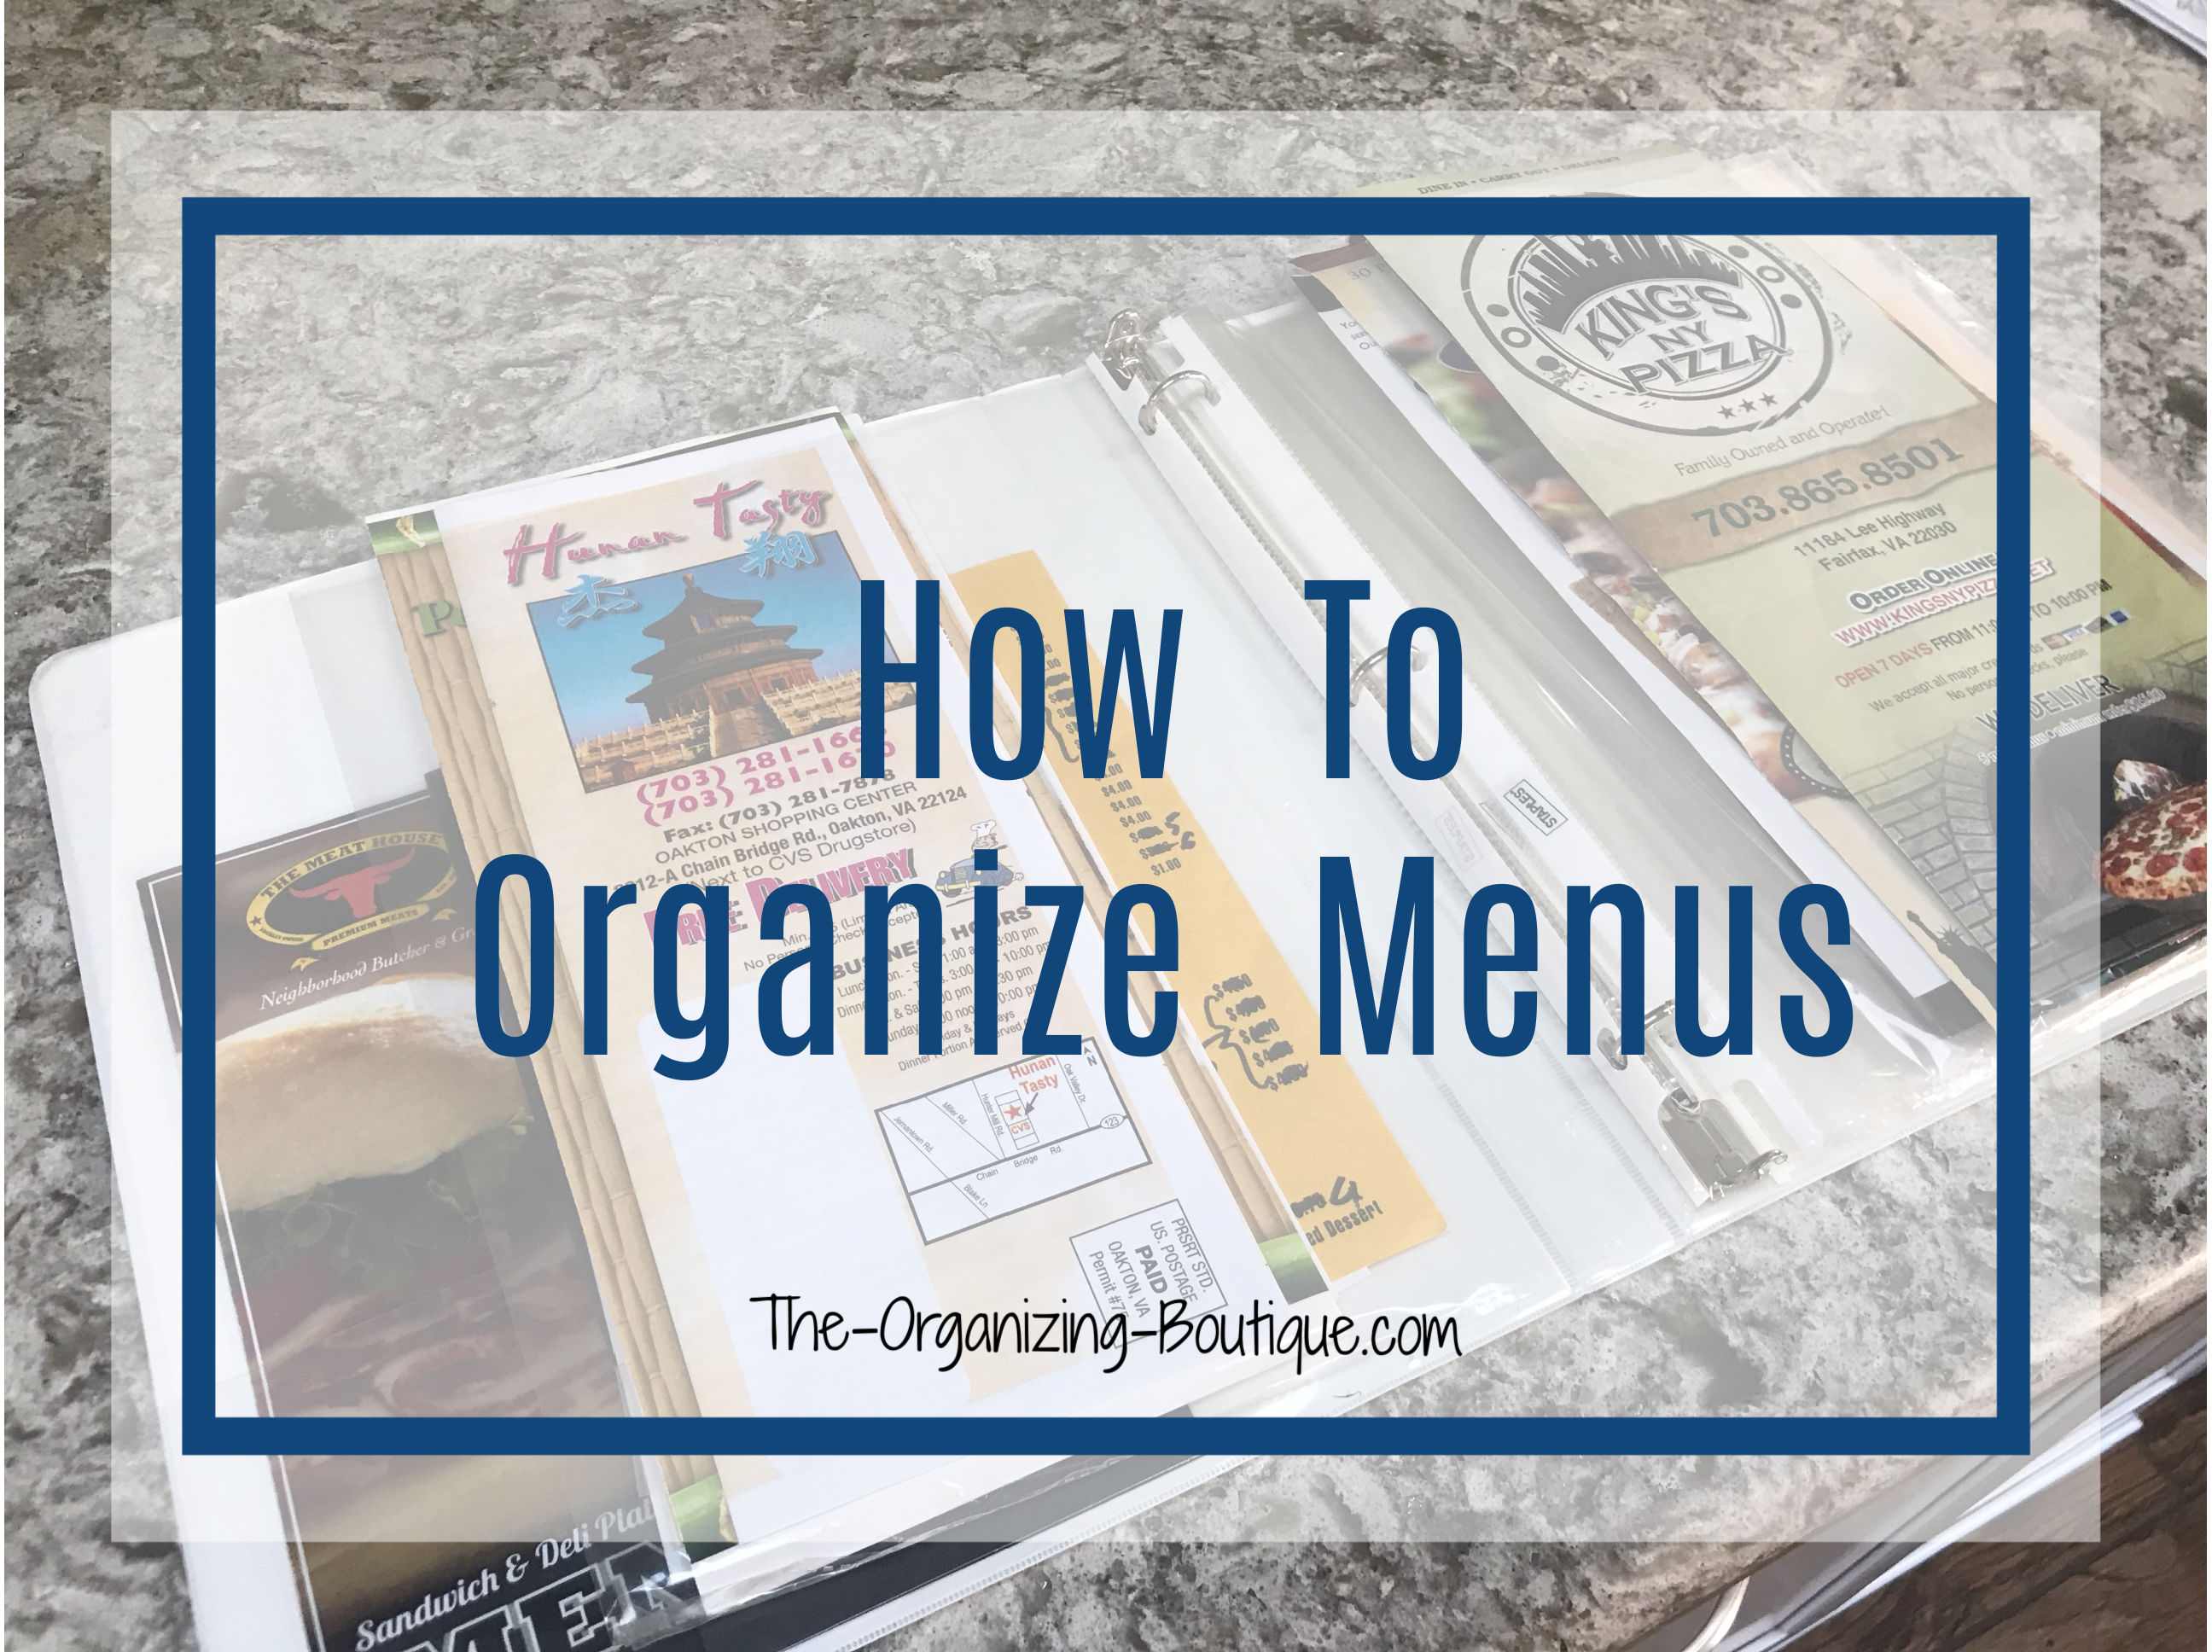 Here's how to organize take out menus and some great menu organizer product suggestions that will help you maintain kitchen cabinet organization. Enjoy!